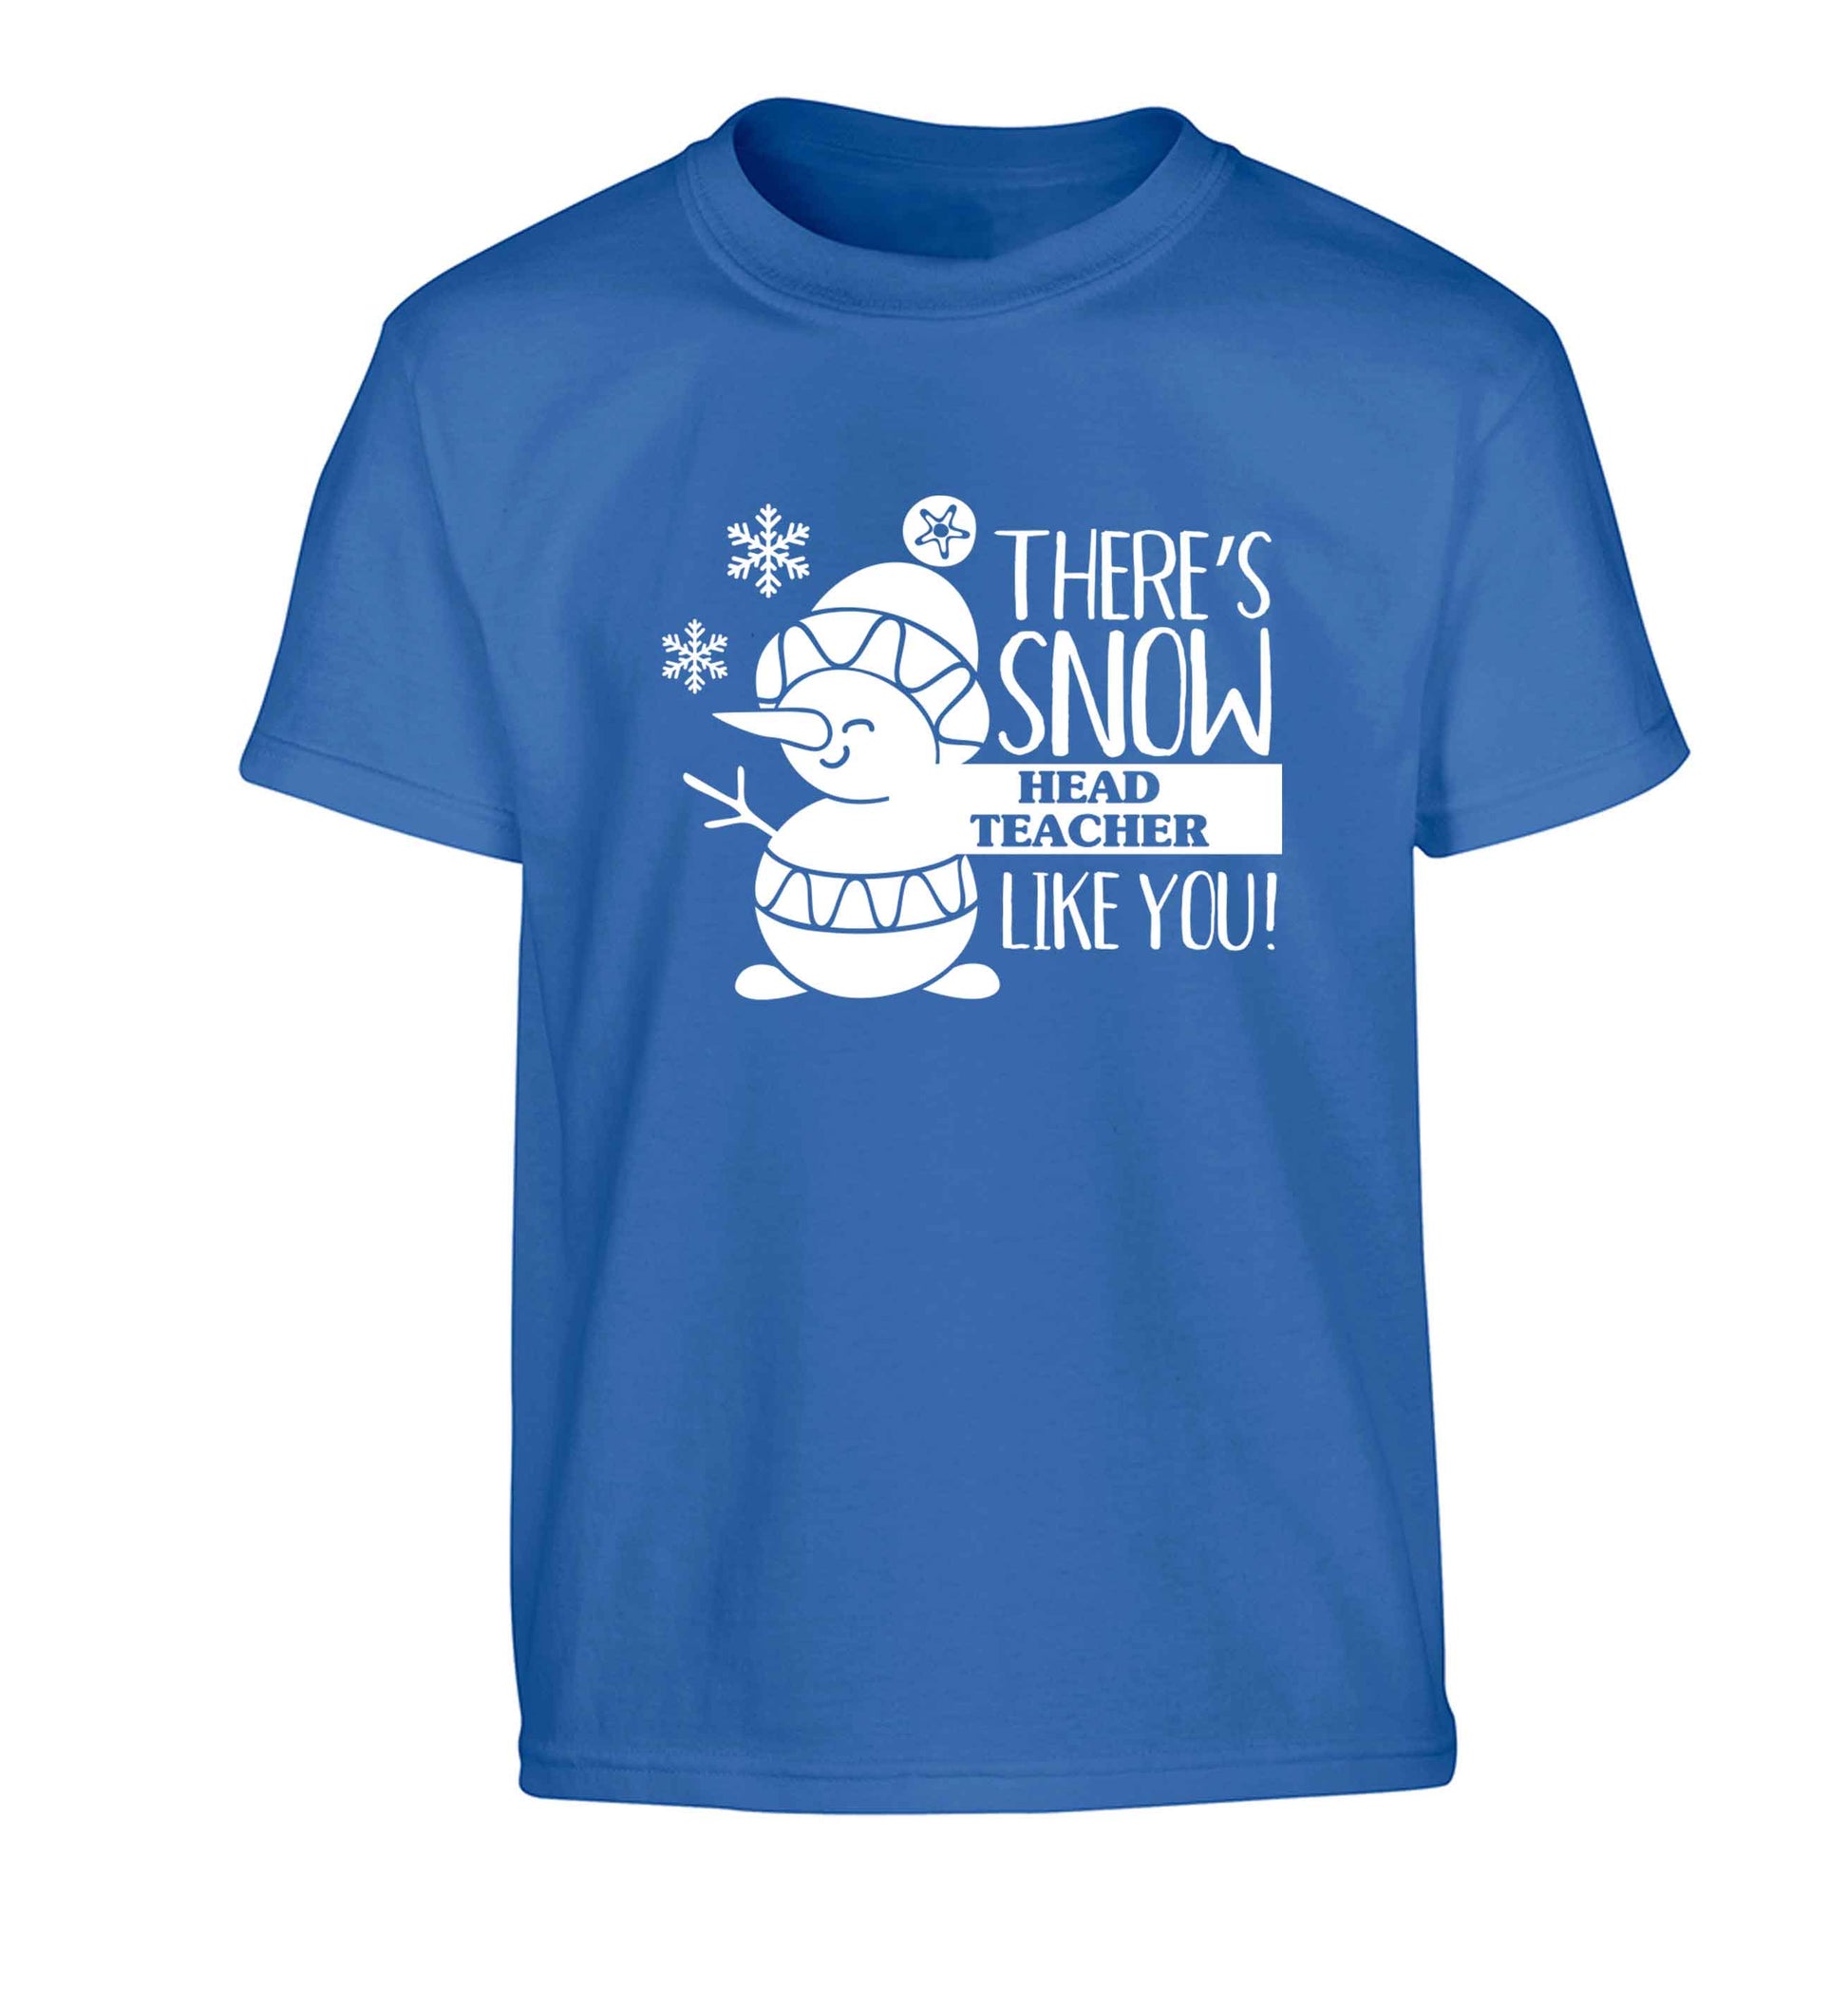 There's snow head teacher like you Children's blue Tshirt 12-13 Years